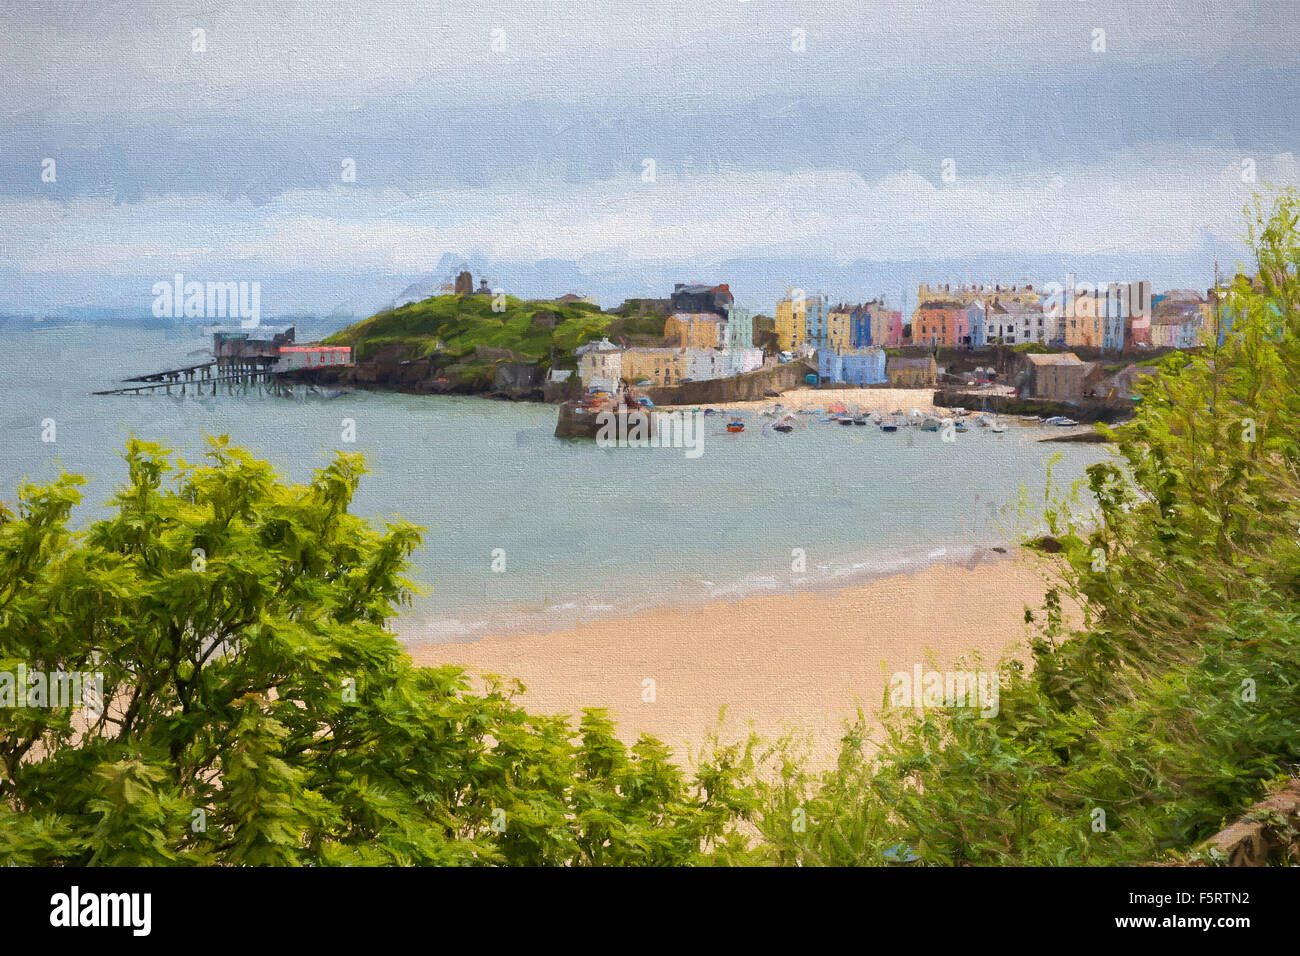 Tenby South wales UK beach and town illustration like oil painting Stock Photo